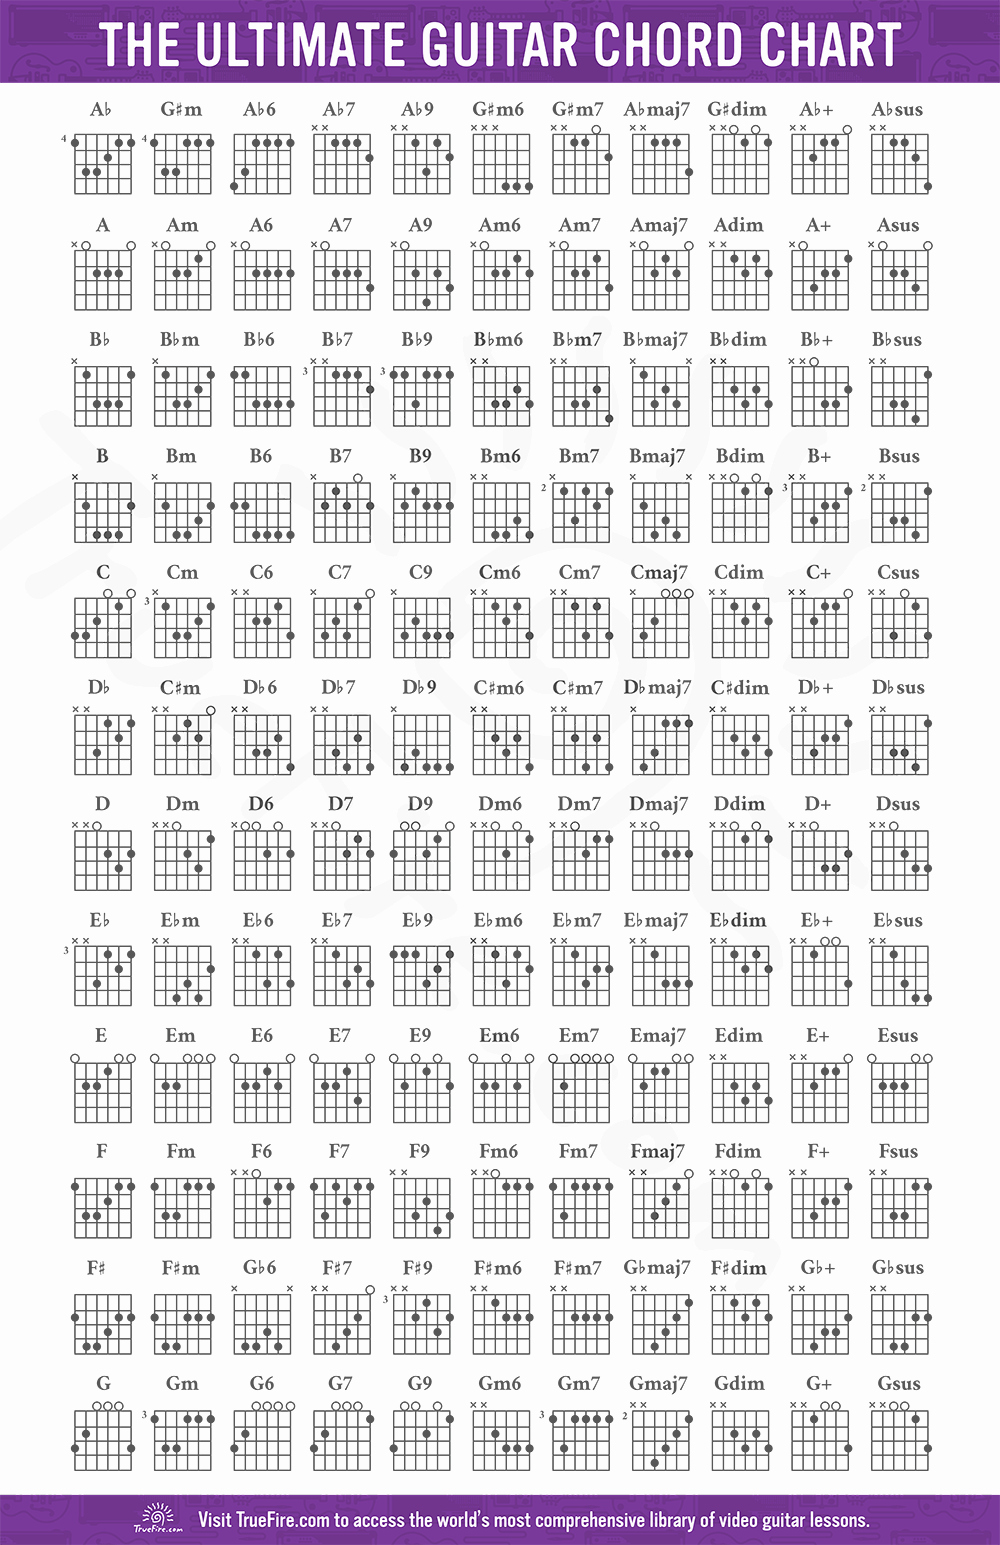 Chord Chart Guitar Complete Awesome Guitar Chord Chart Truefire